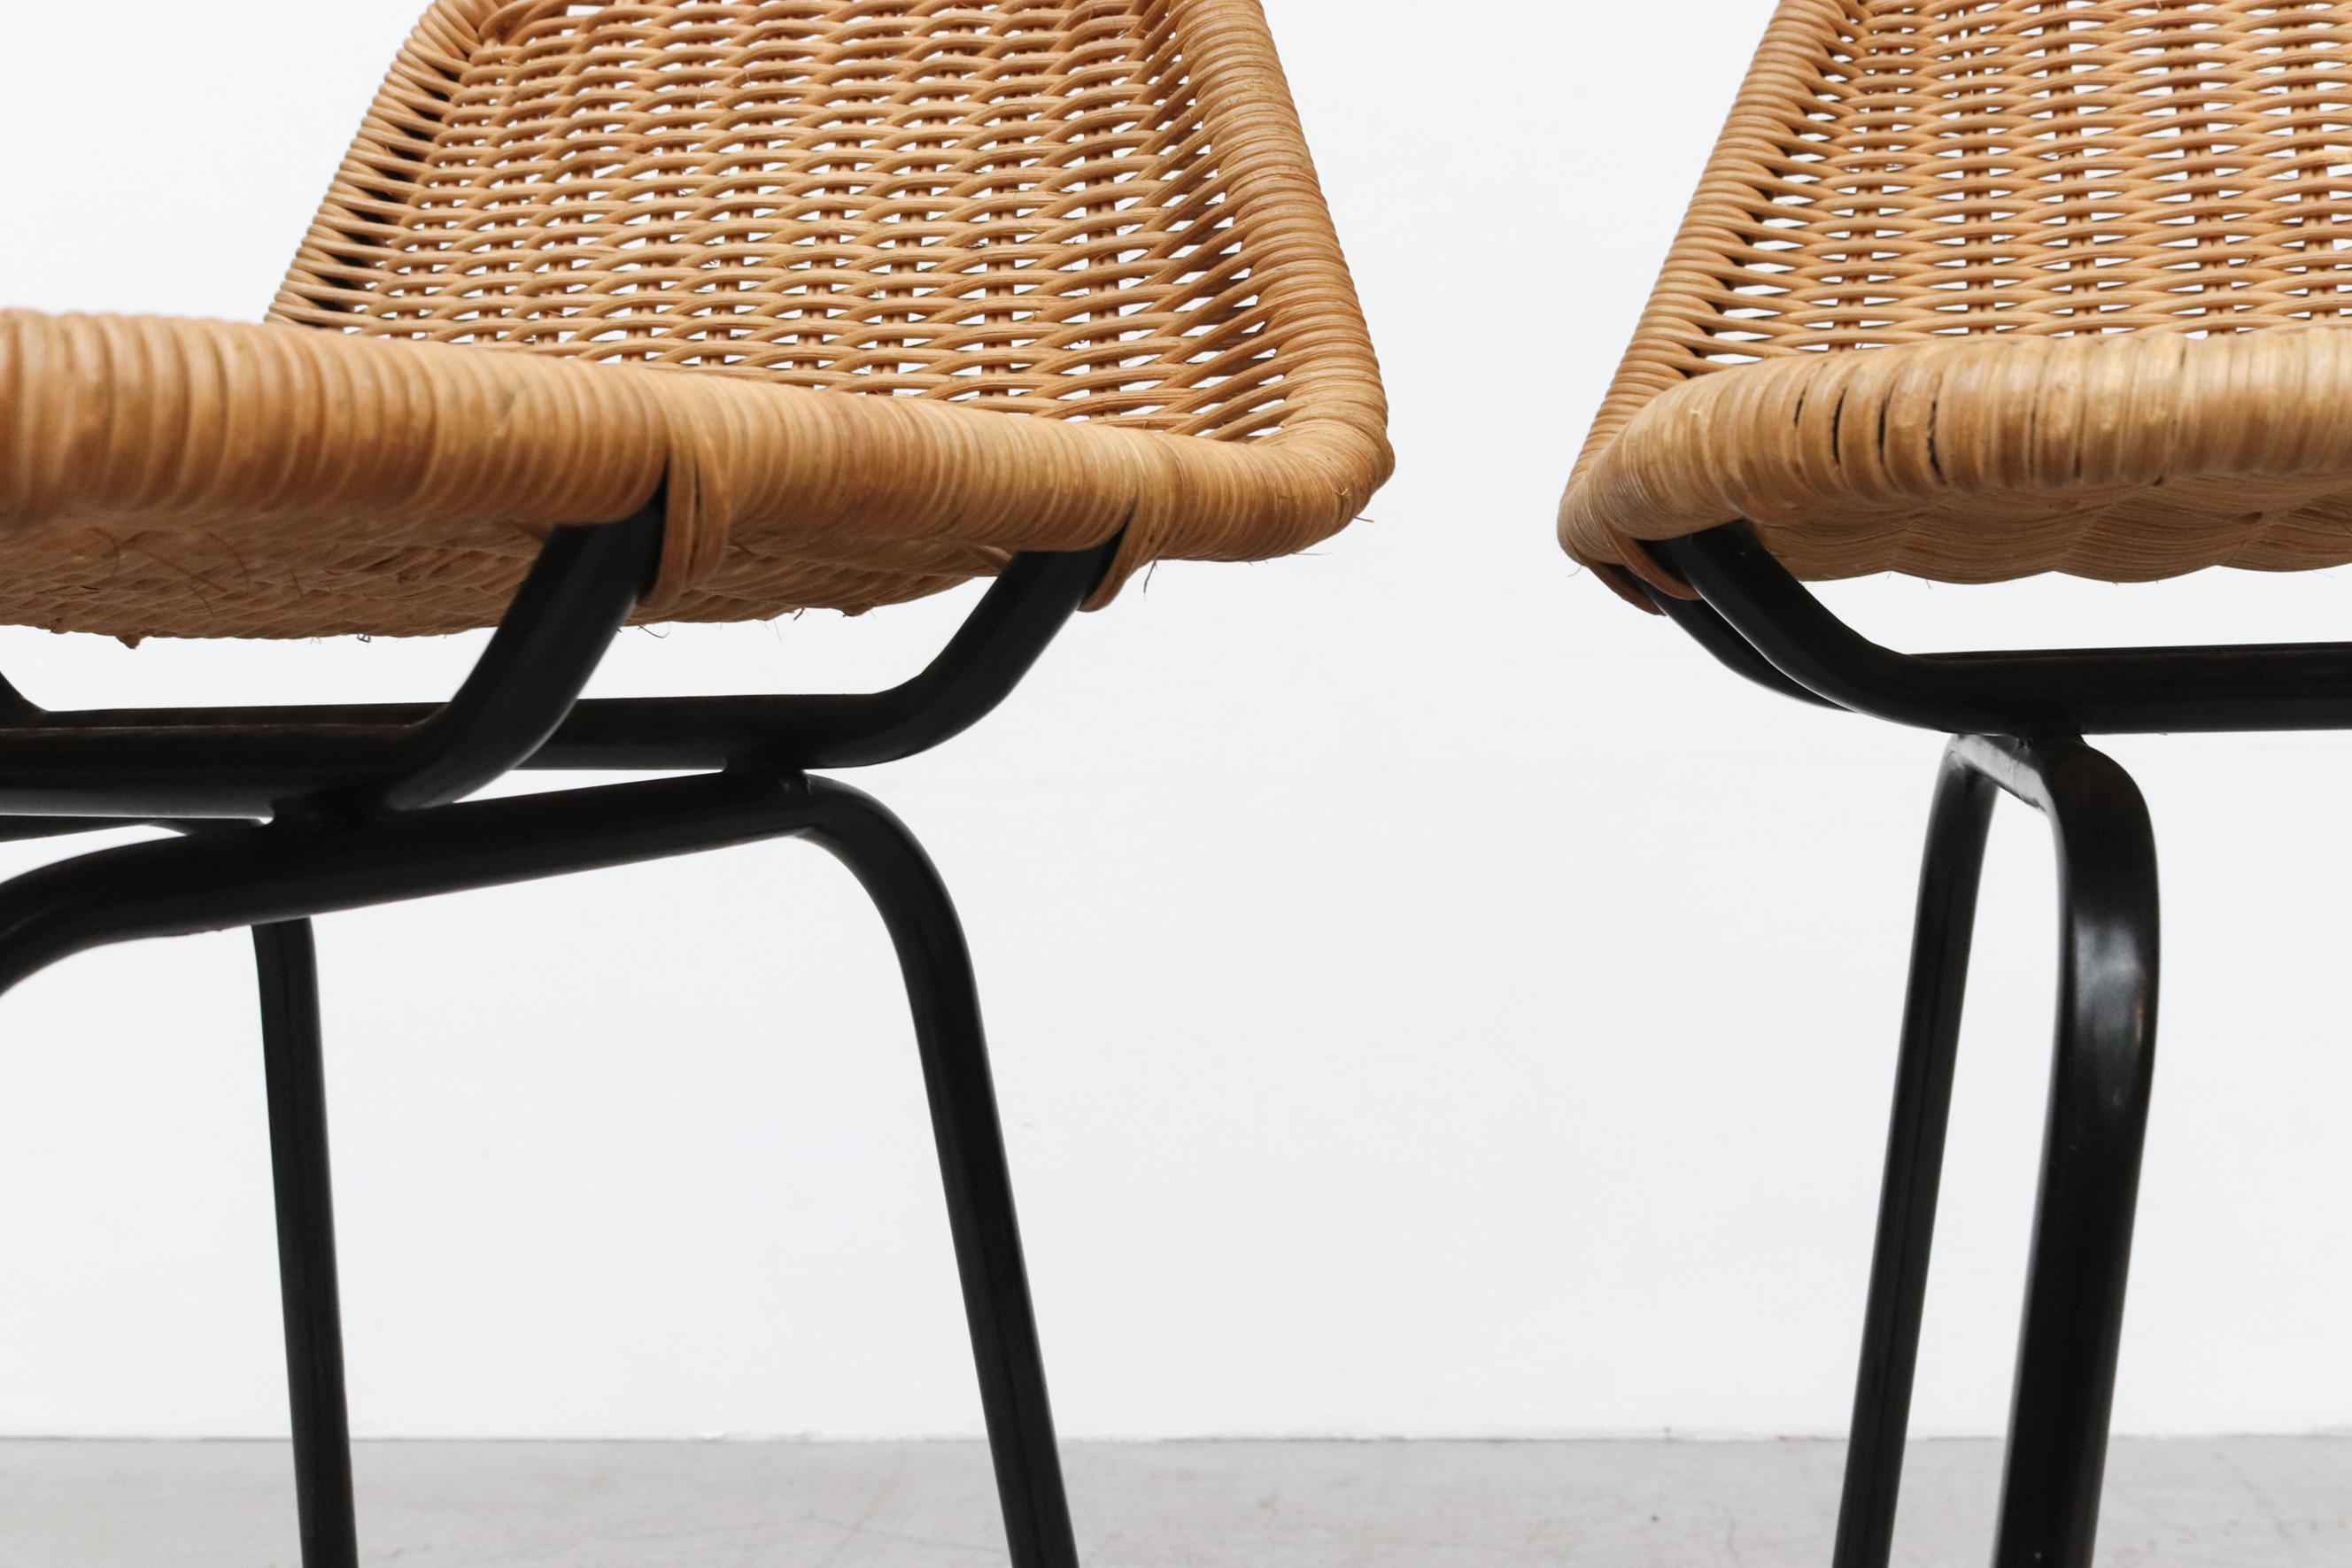 Woven Charlotte Perriand Style Wicker Stools with Angled Back and Black Legs